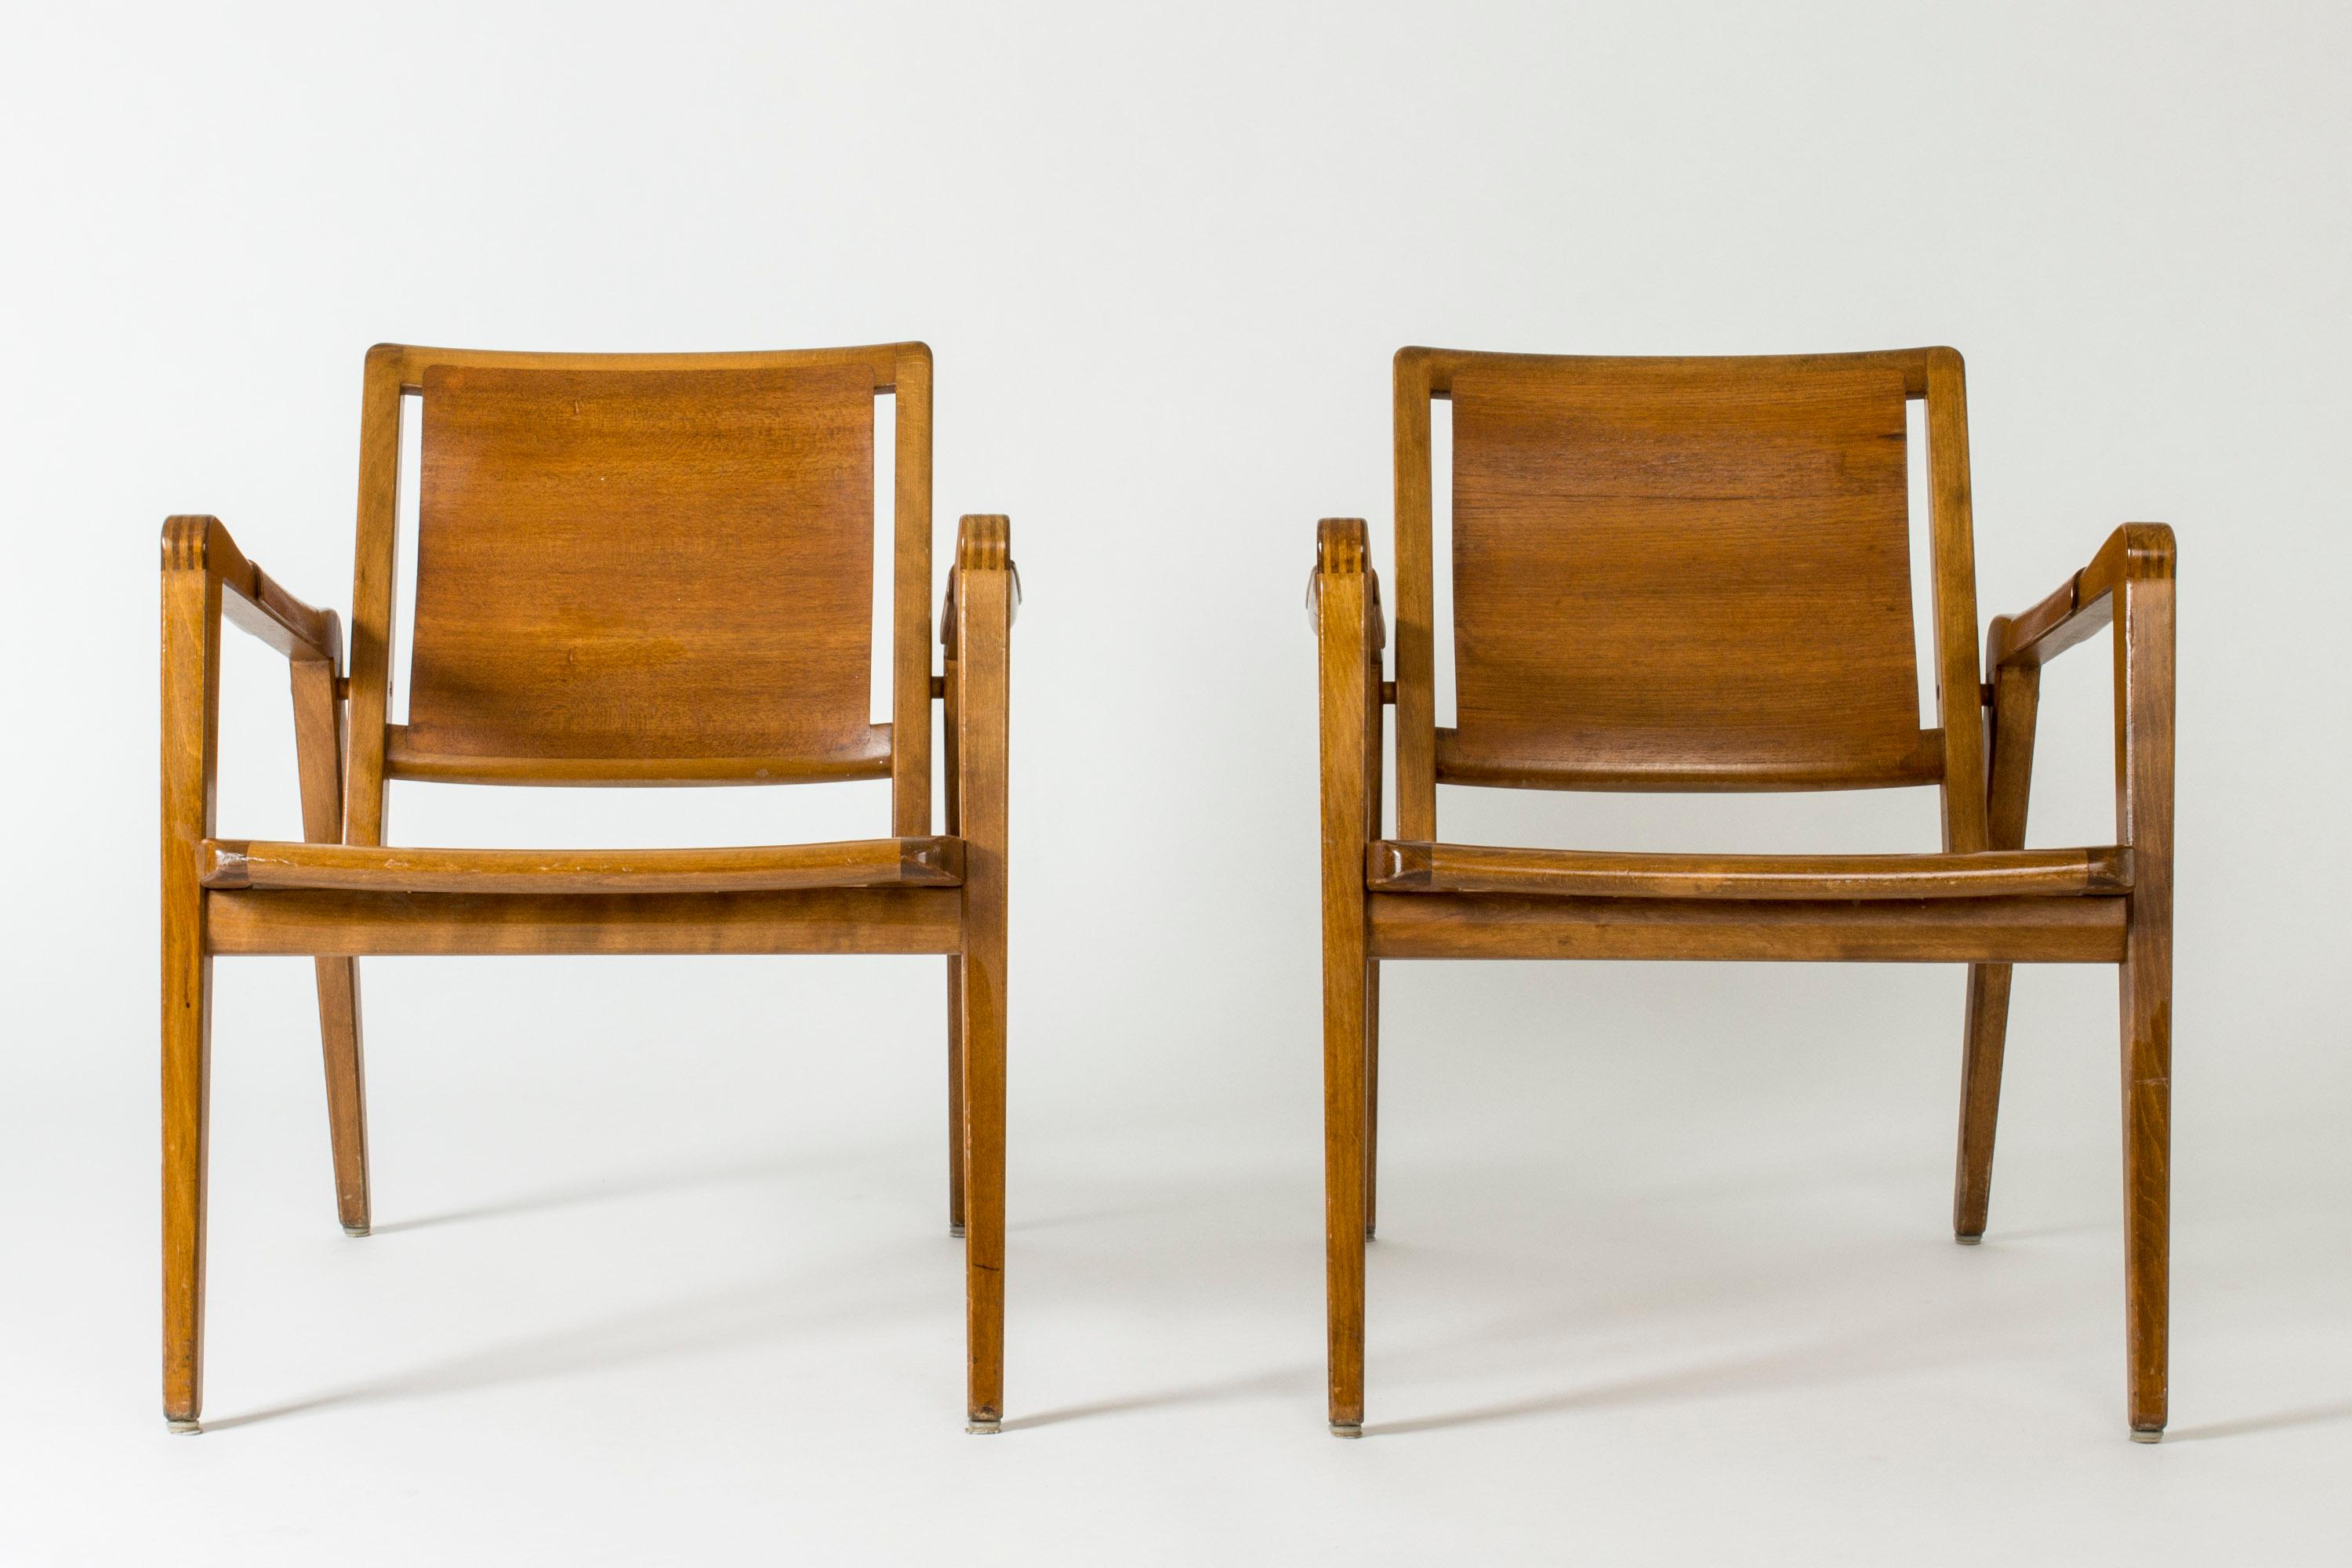 Swedish Pair of Armchairs by Axel Larsson for Bodafors, Sweden, 1940s.